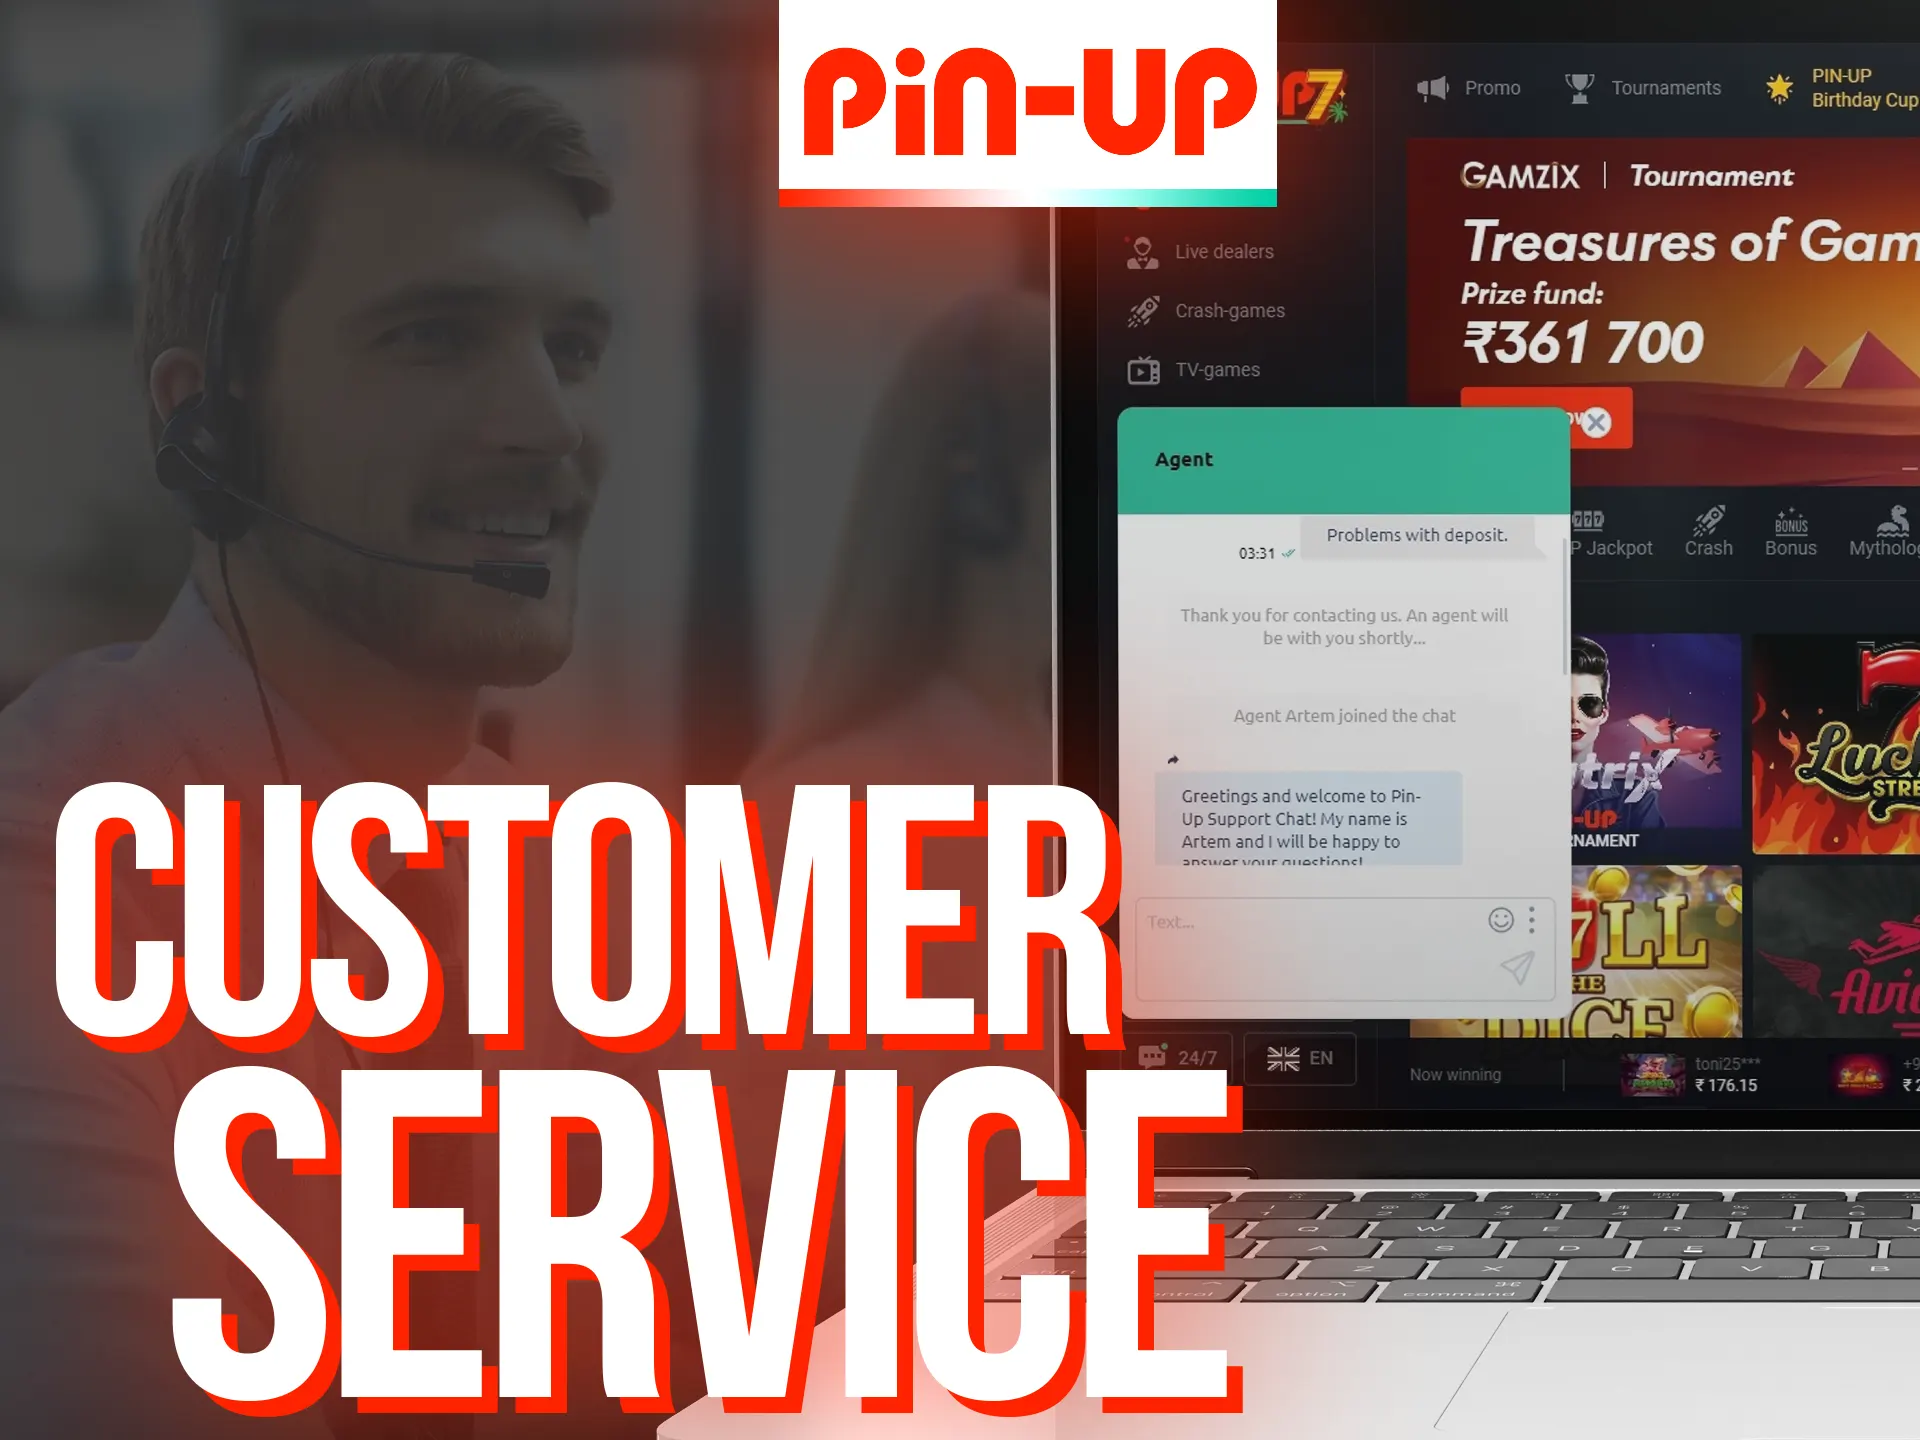 Ask a question to Pin-Up Casino's customer support team.